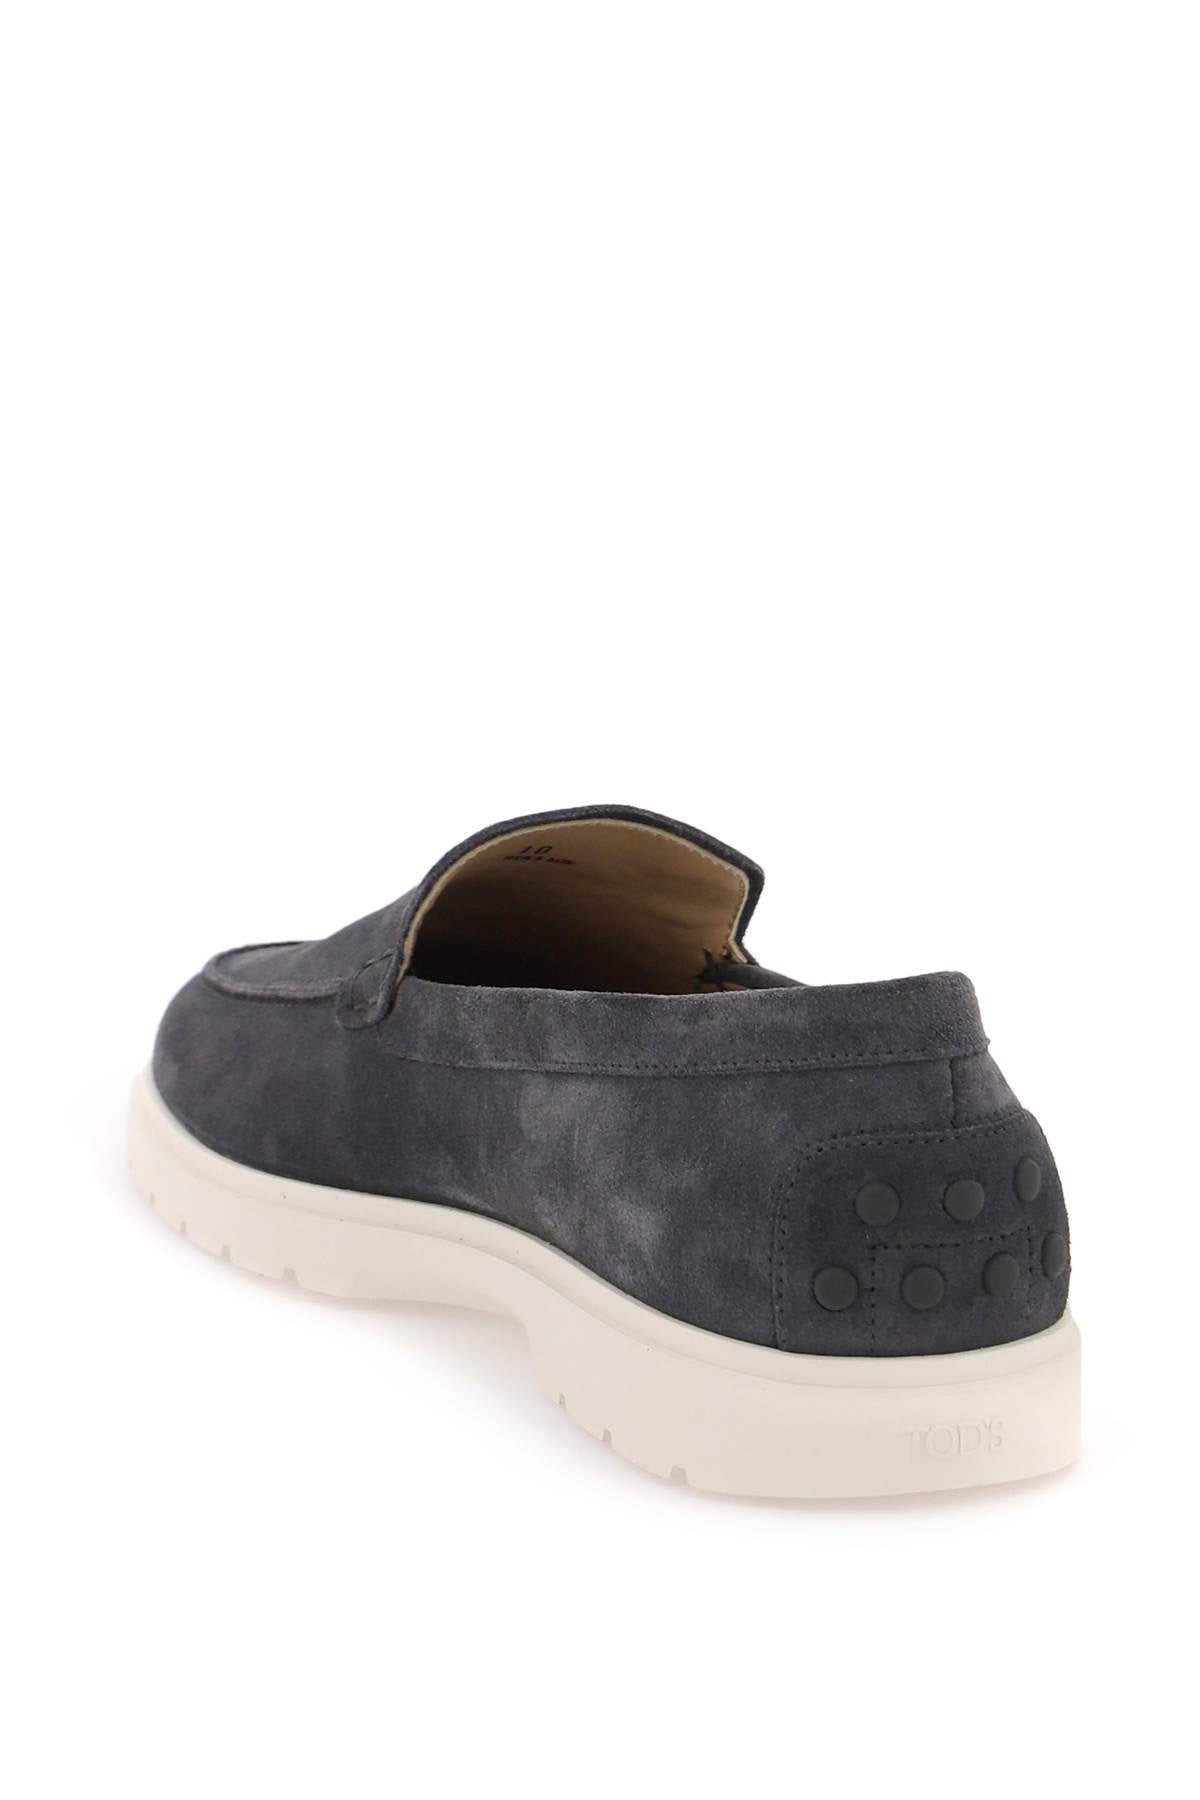 Tod's suede loafers-2